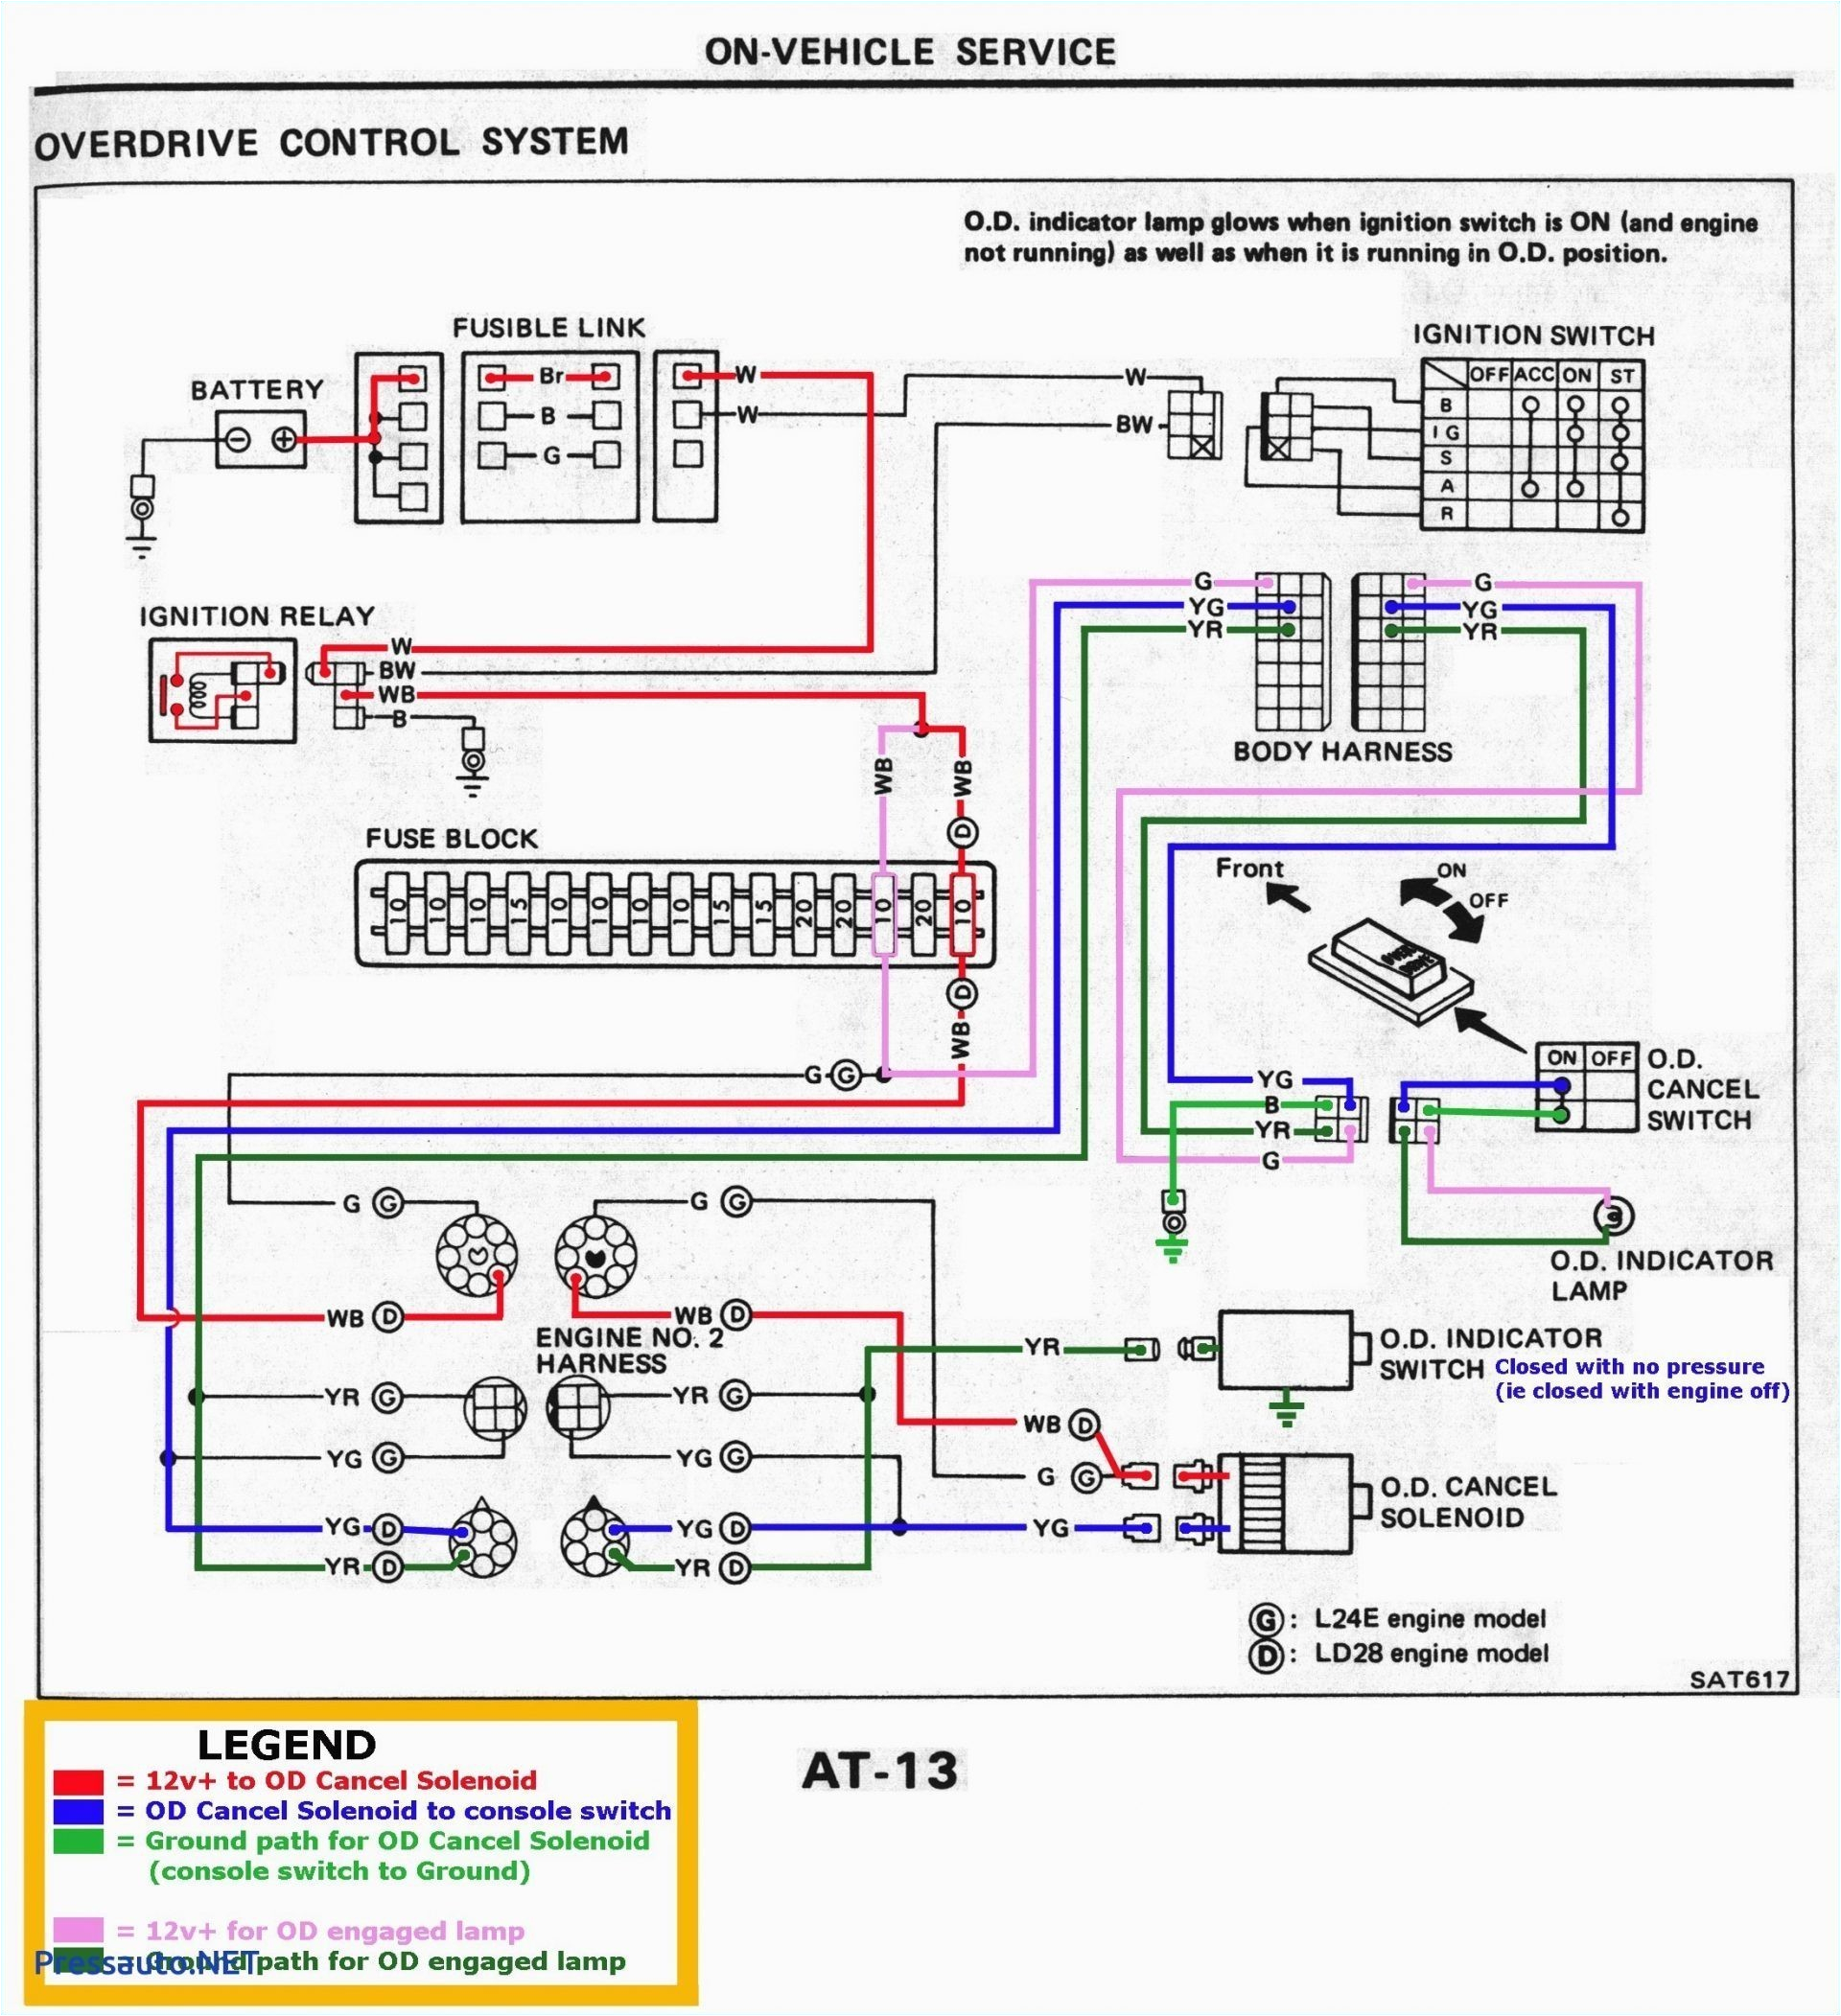 electrical wiring harness interview questions wiring diagram ame wiring harness interview questions and answers residential electrical